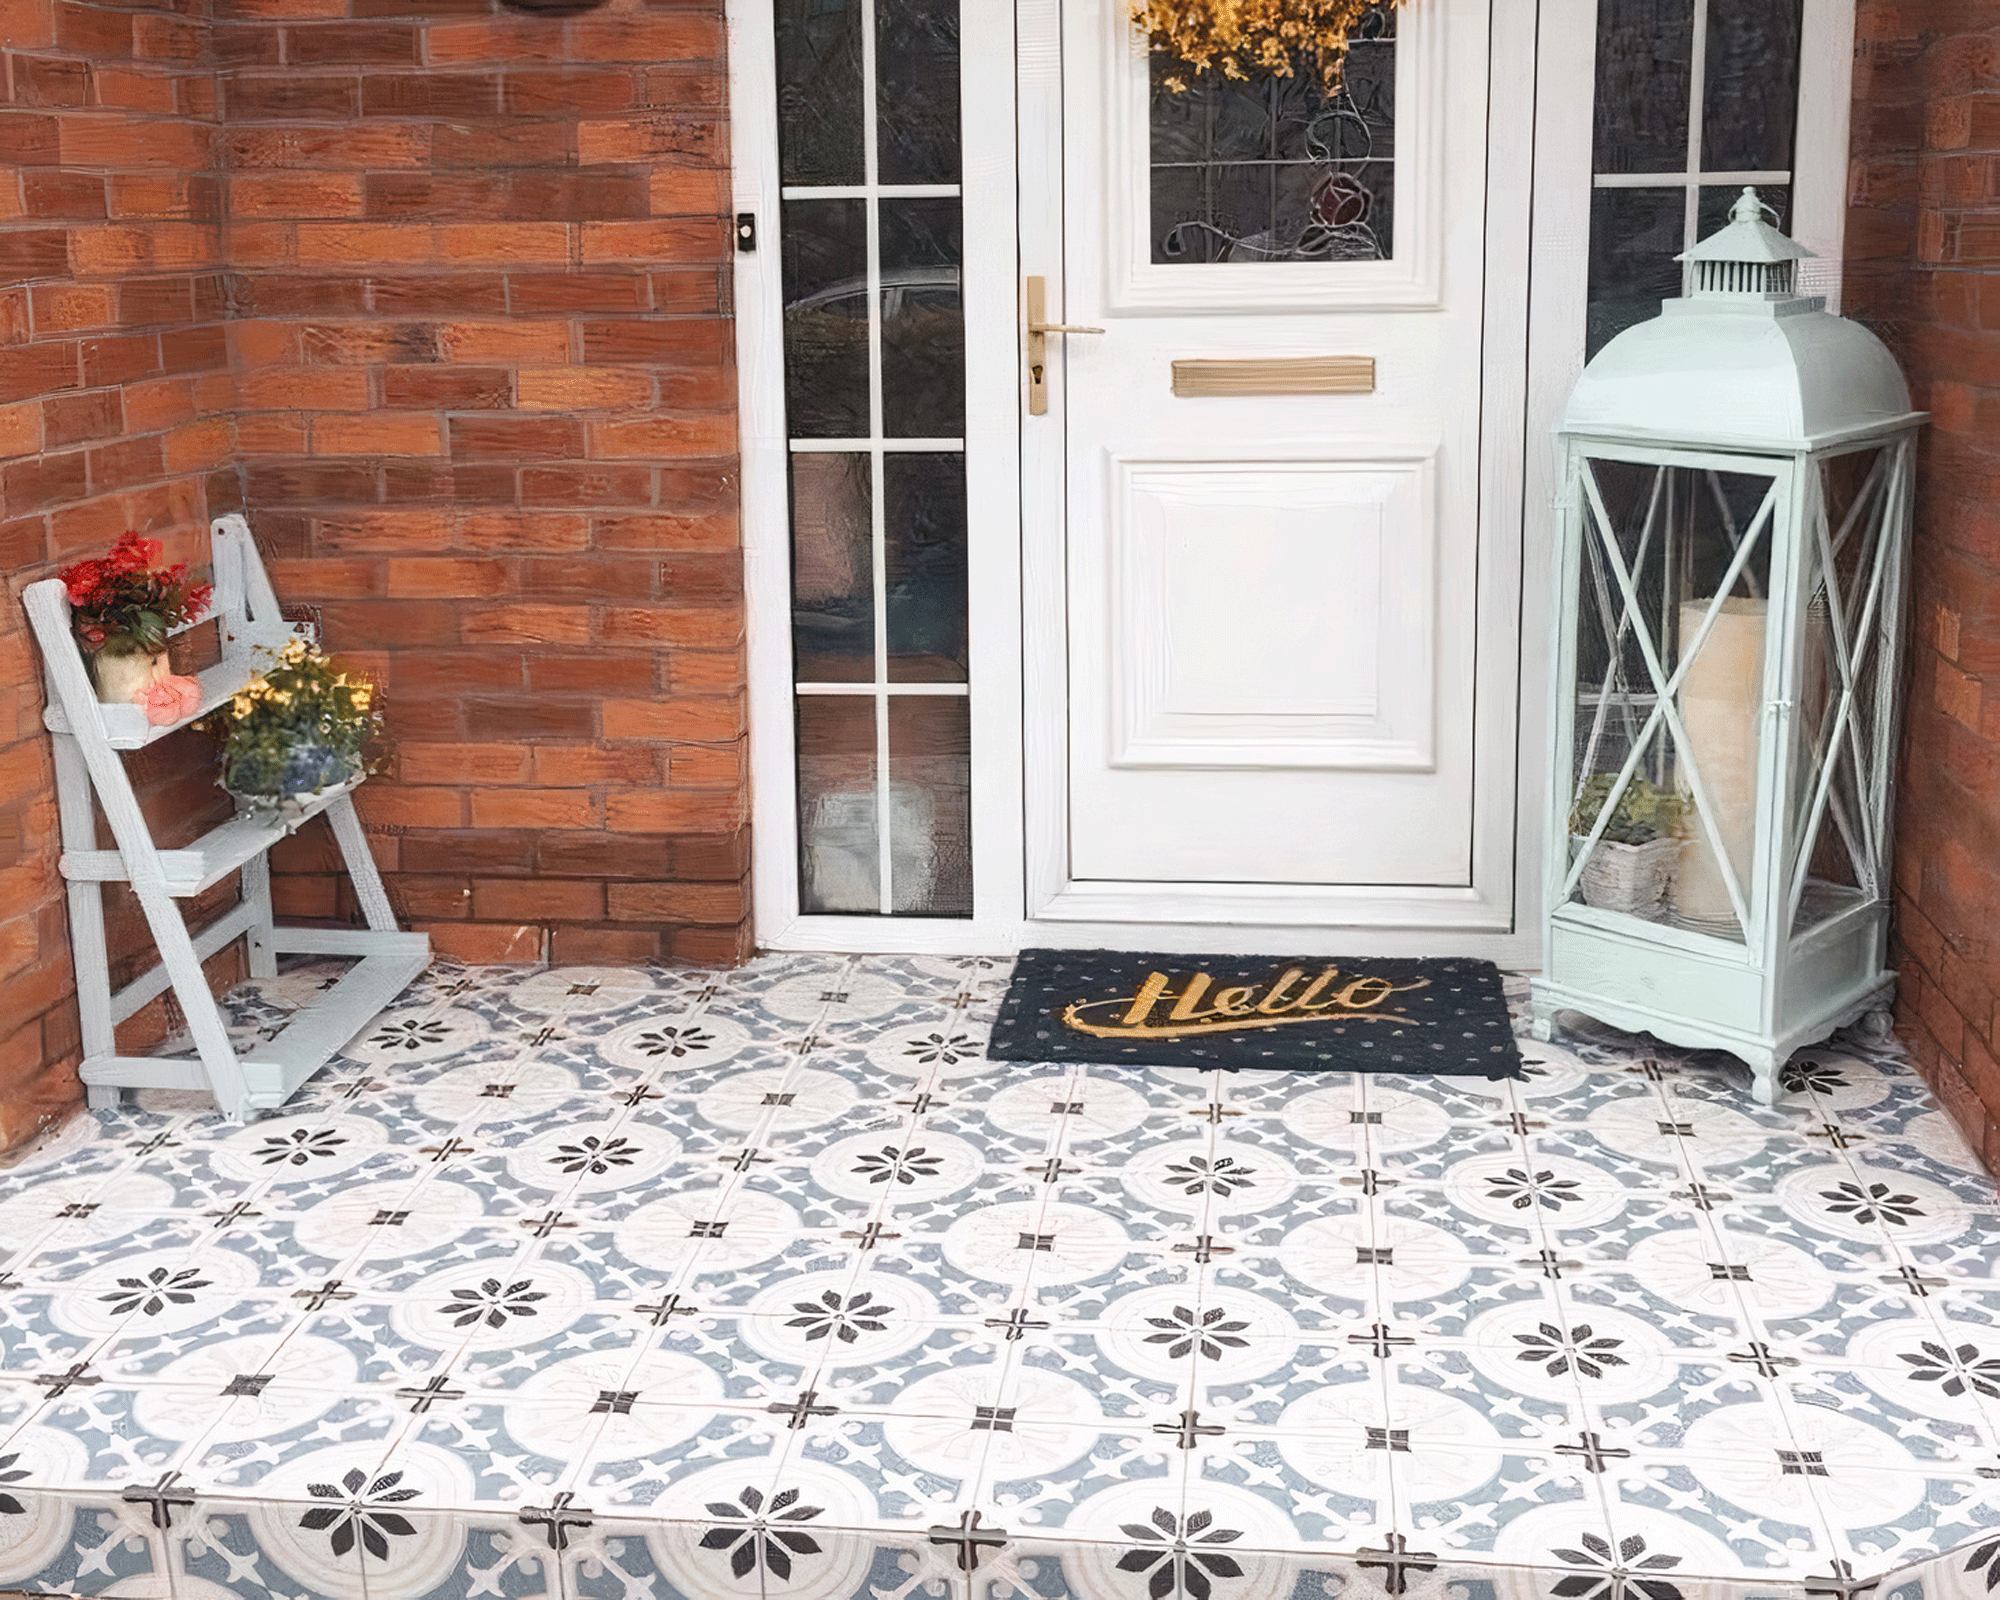 Porch area with light blue and gray patterned floor tiles, and 'Hello' door mat.